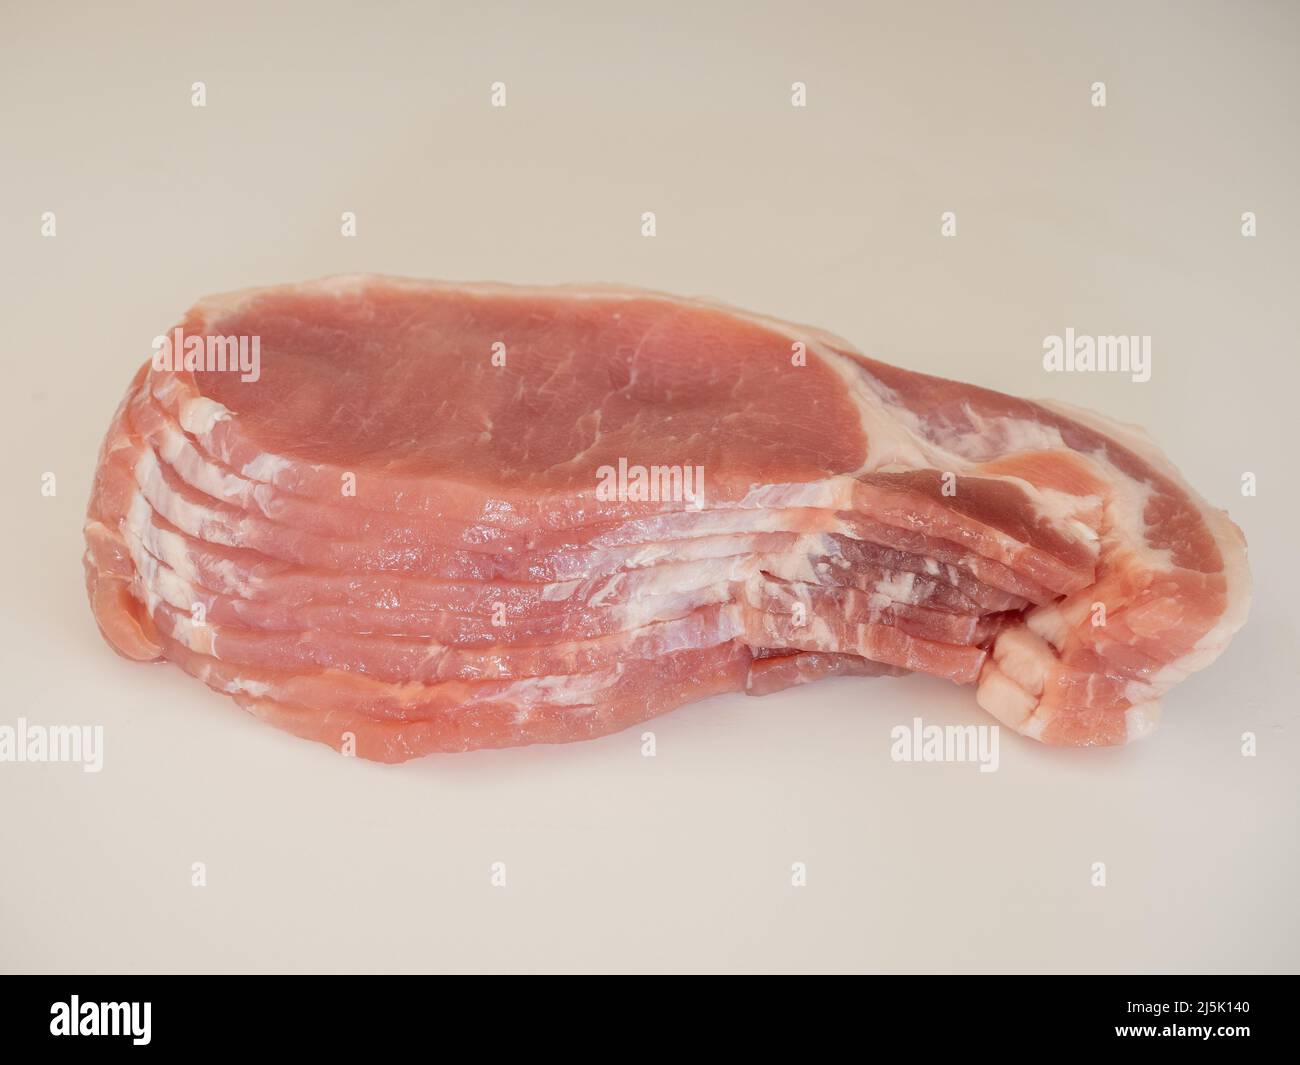 slices of belly pork back bacon isolated on a white background Stock Photo